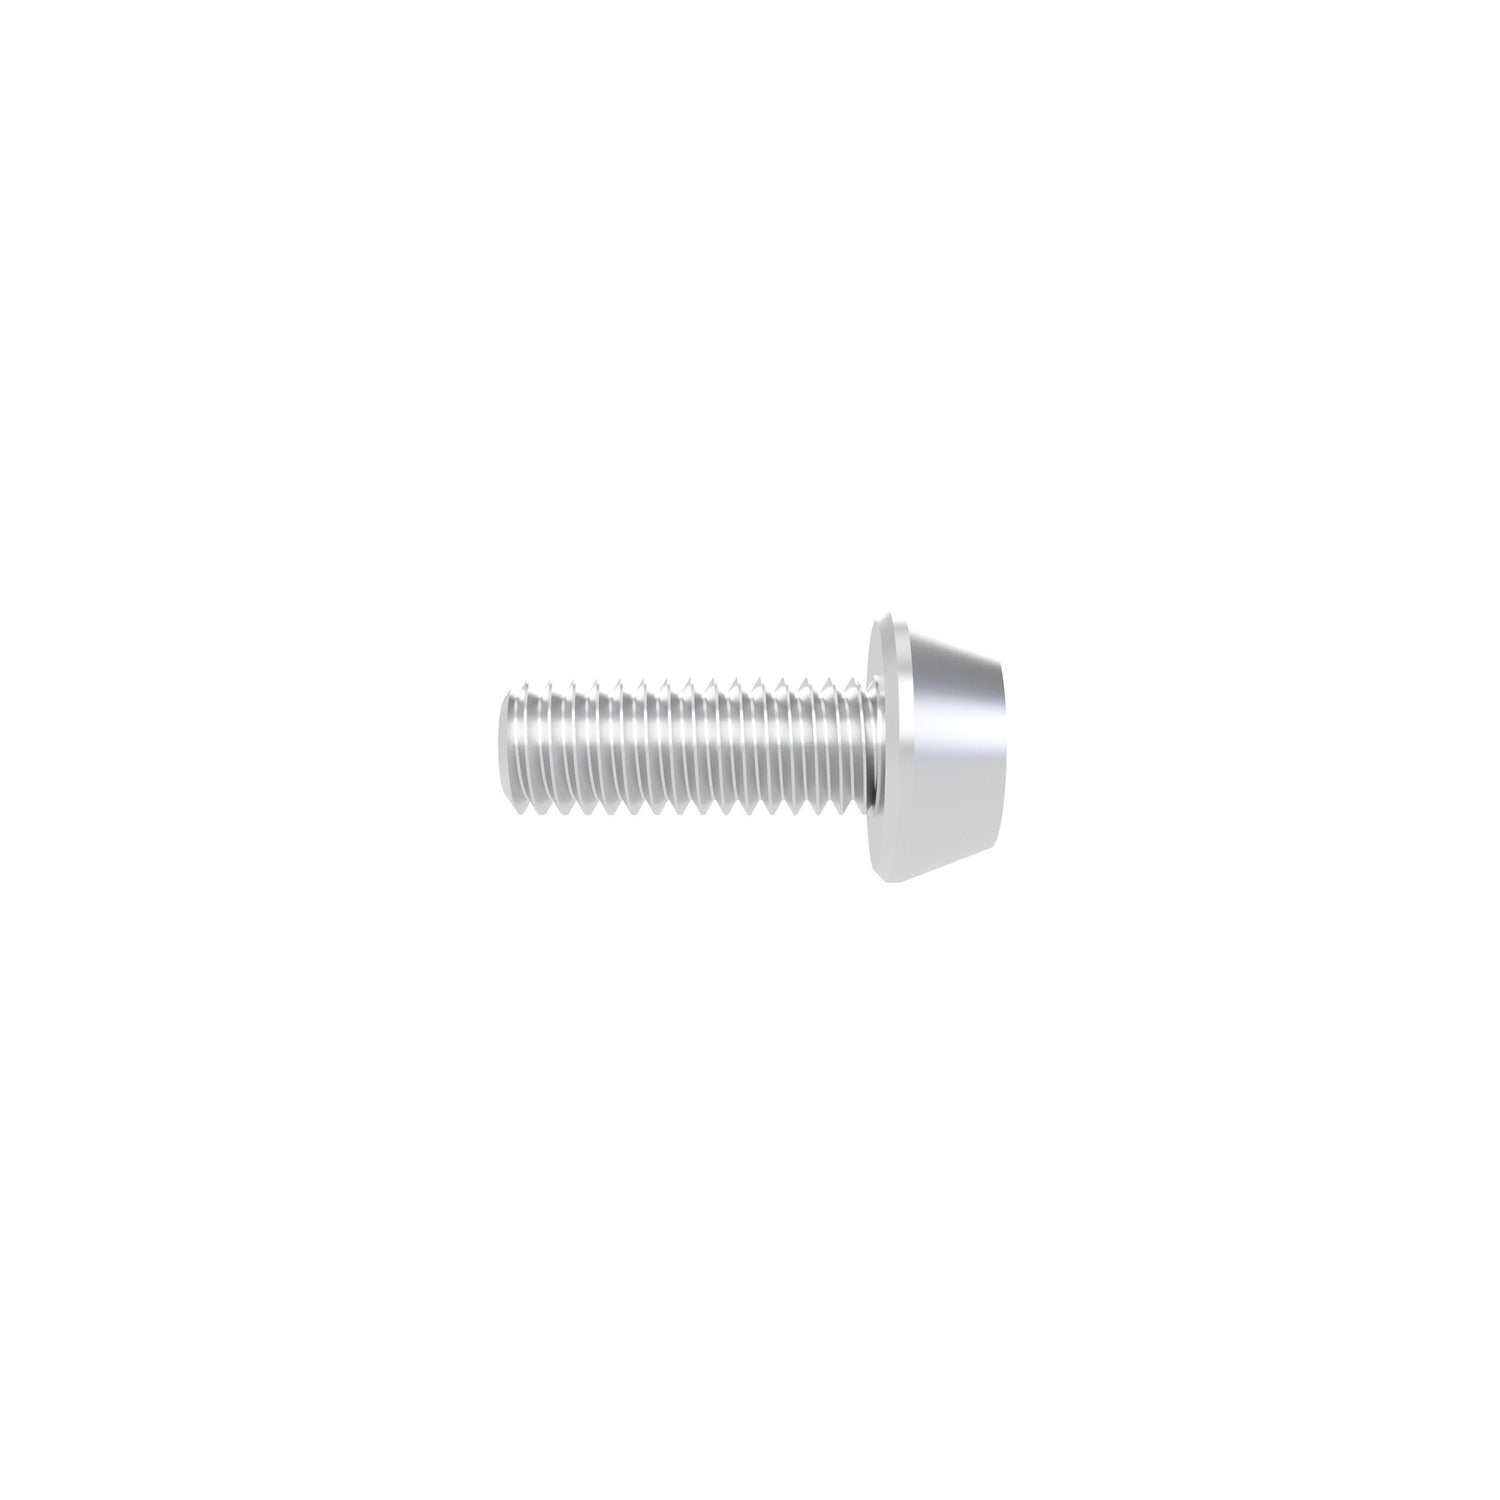 M5-0.8 X 16mm Penta Pin Security Bolts - Bicycle Bolts